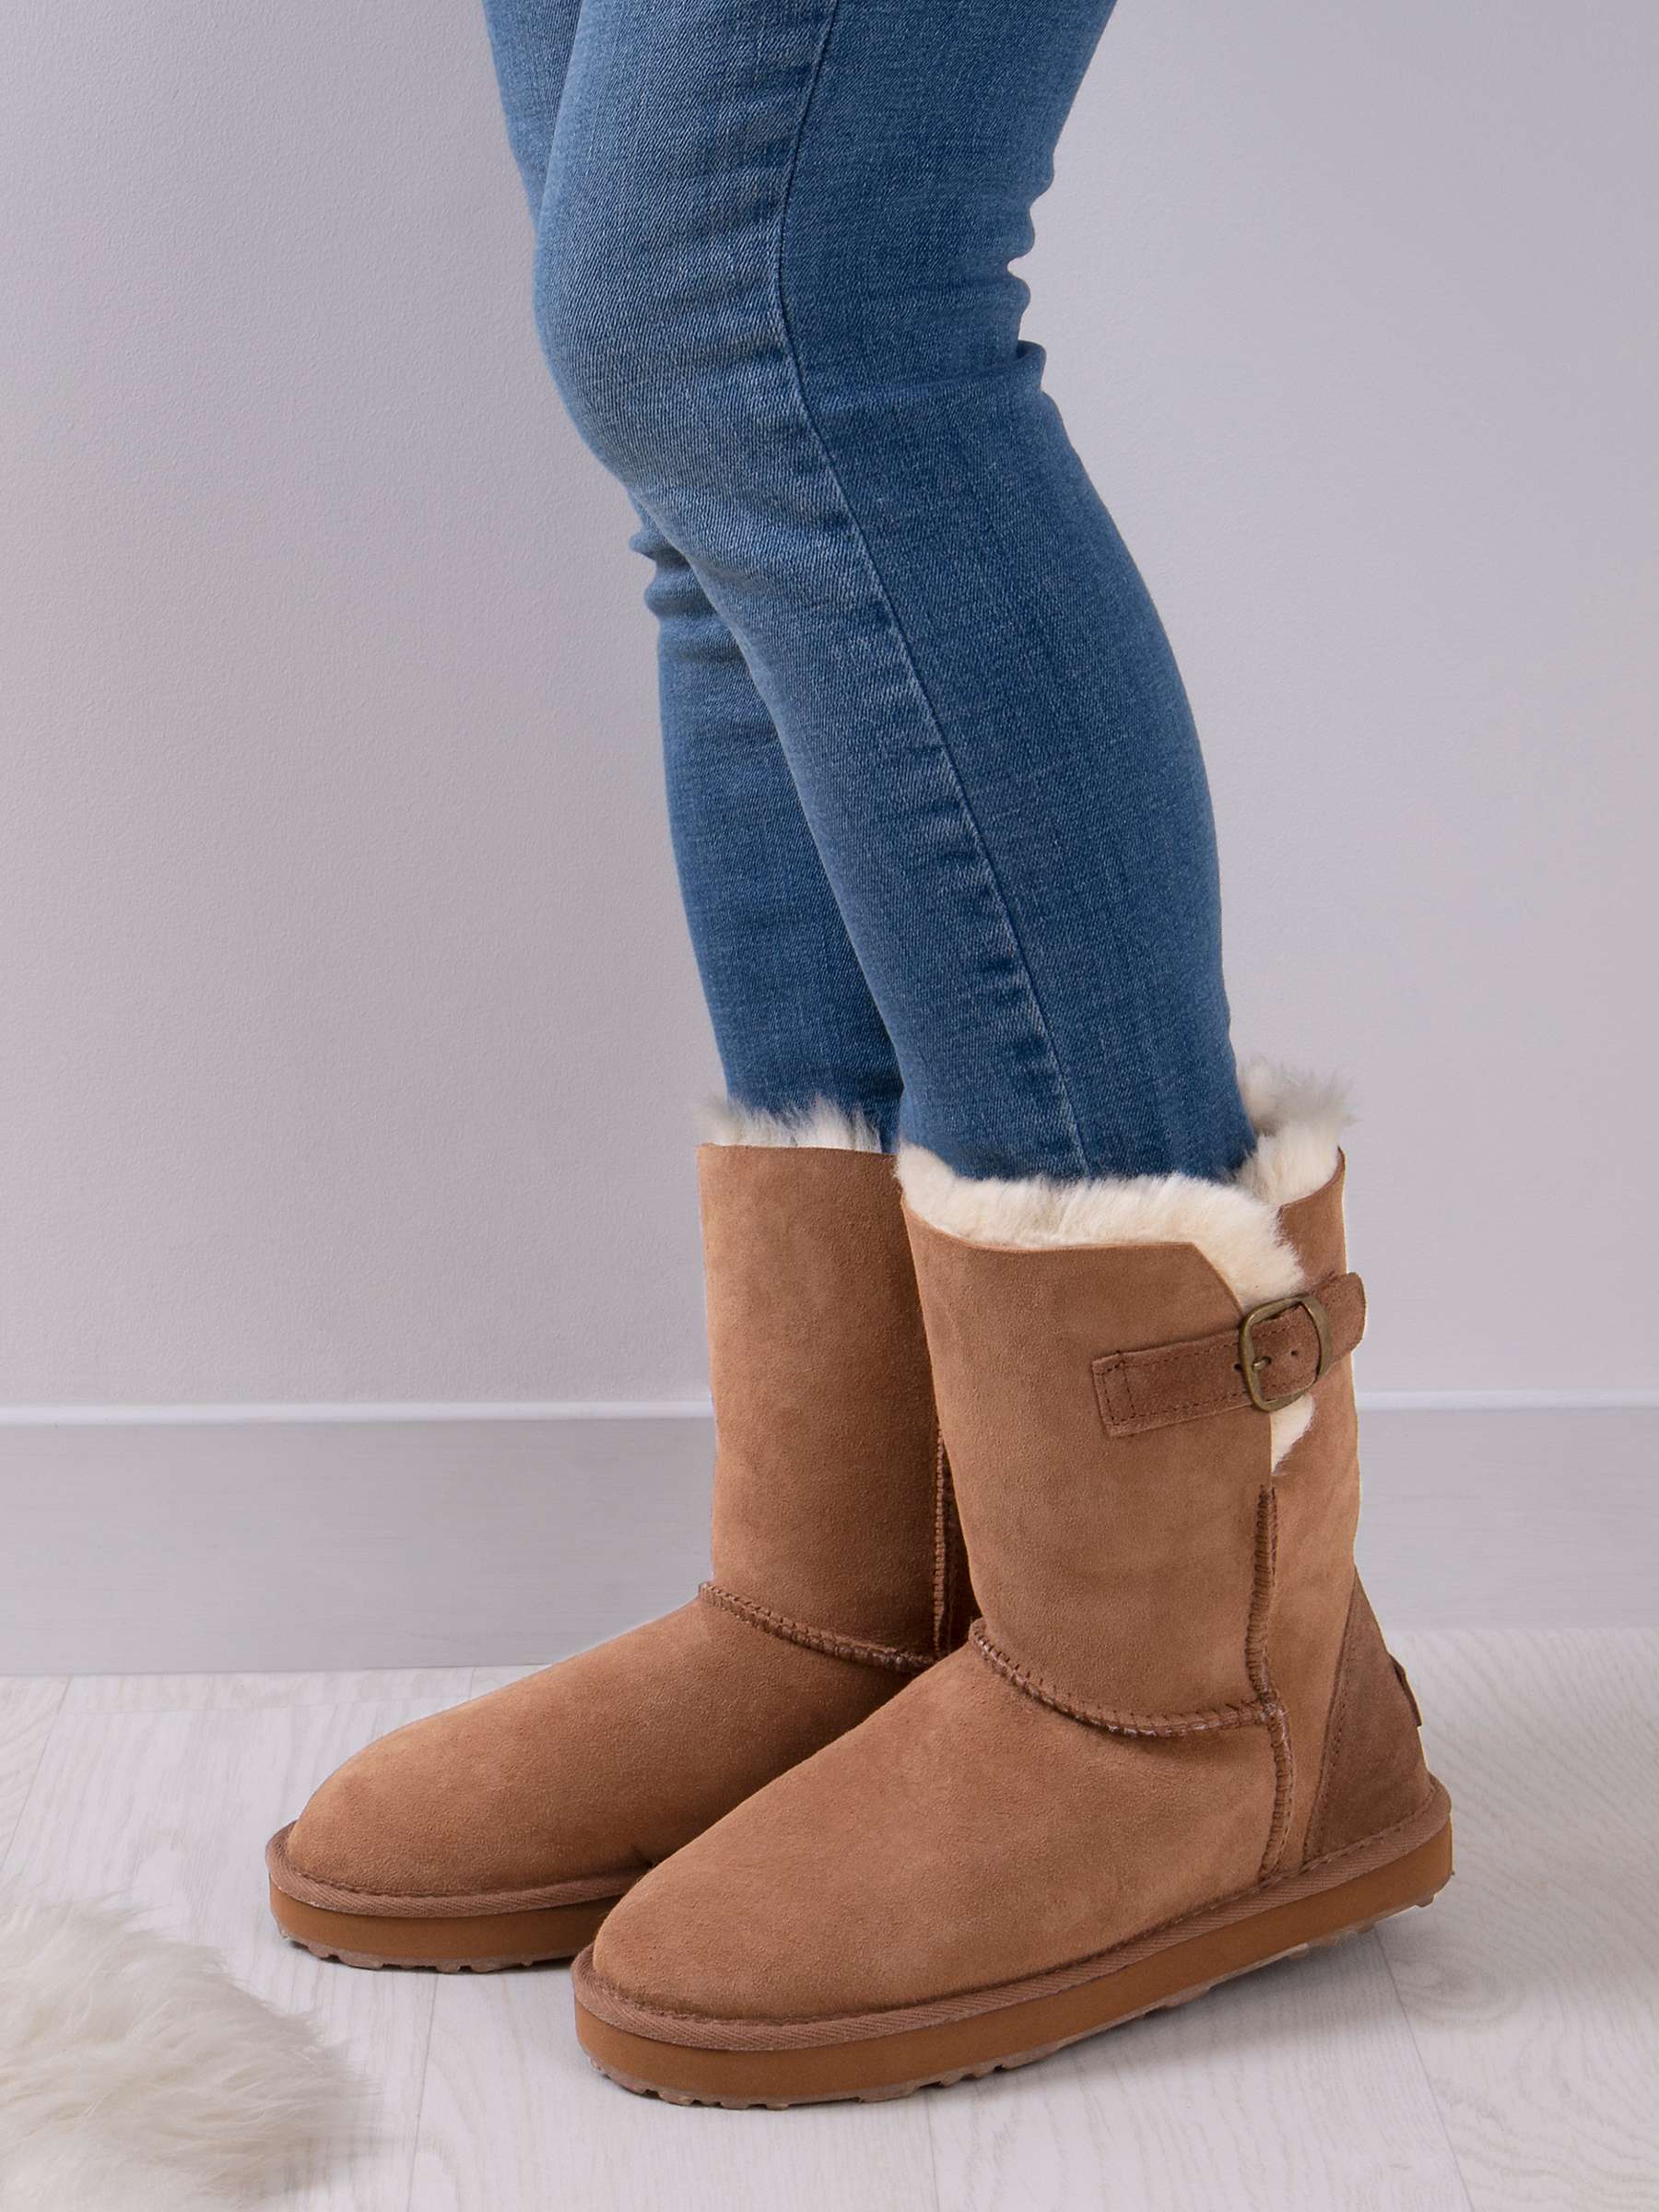 Buy Just Sheepskin Surrey Suede Ankle Boots Online at johnlewis.com